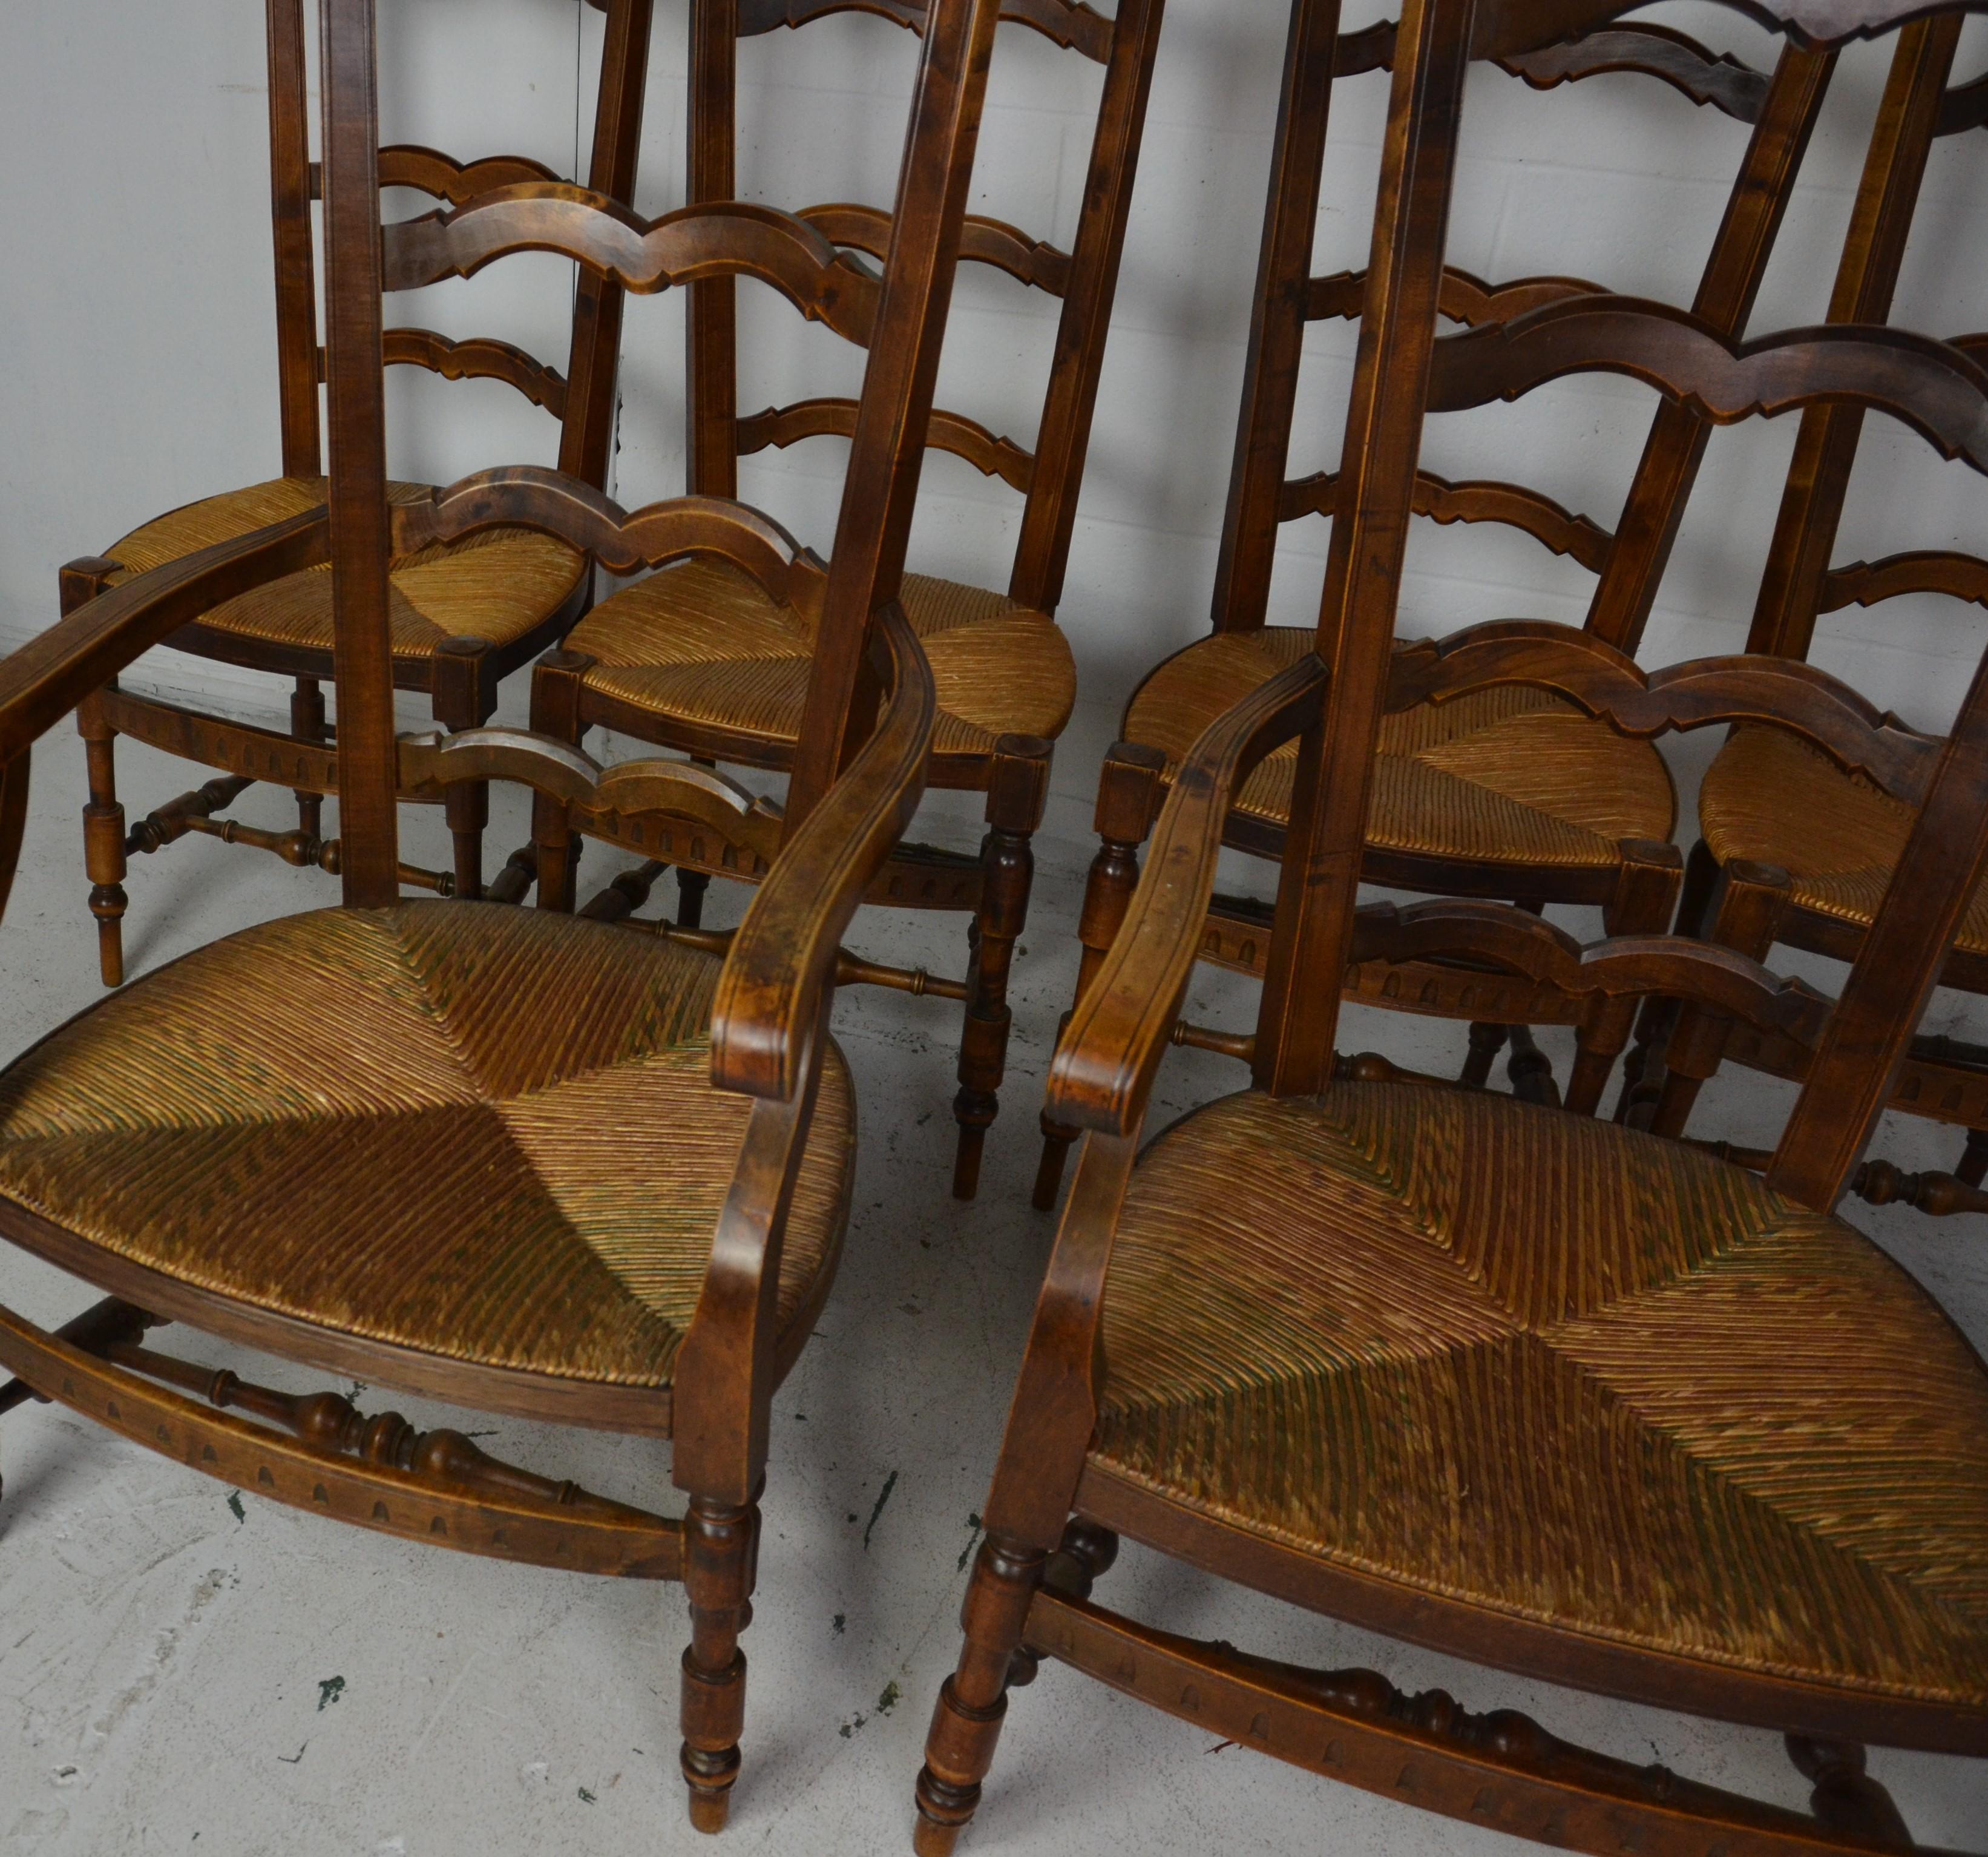 A set of 6 (2 arms + 4 sides) French Provincial ladder-back chairs with ultra-high backs. Walnut finish topped, turned finials to the top. Finely turned legs and double stretchers. Rush seats. Measures: Armchair 23